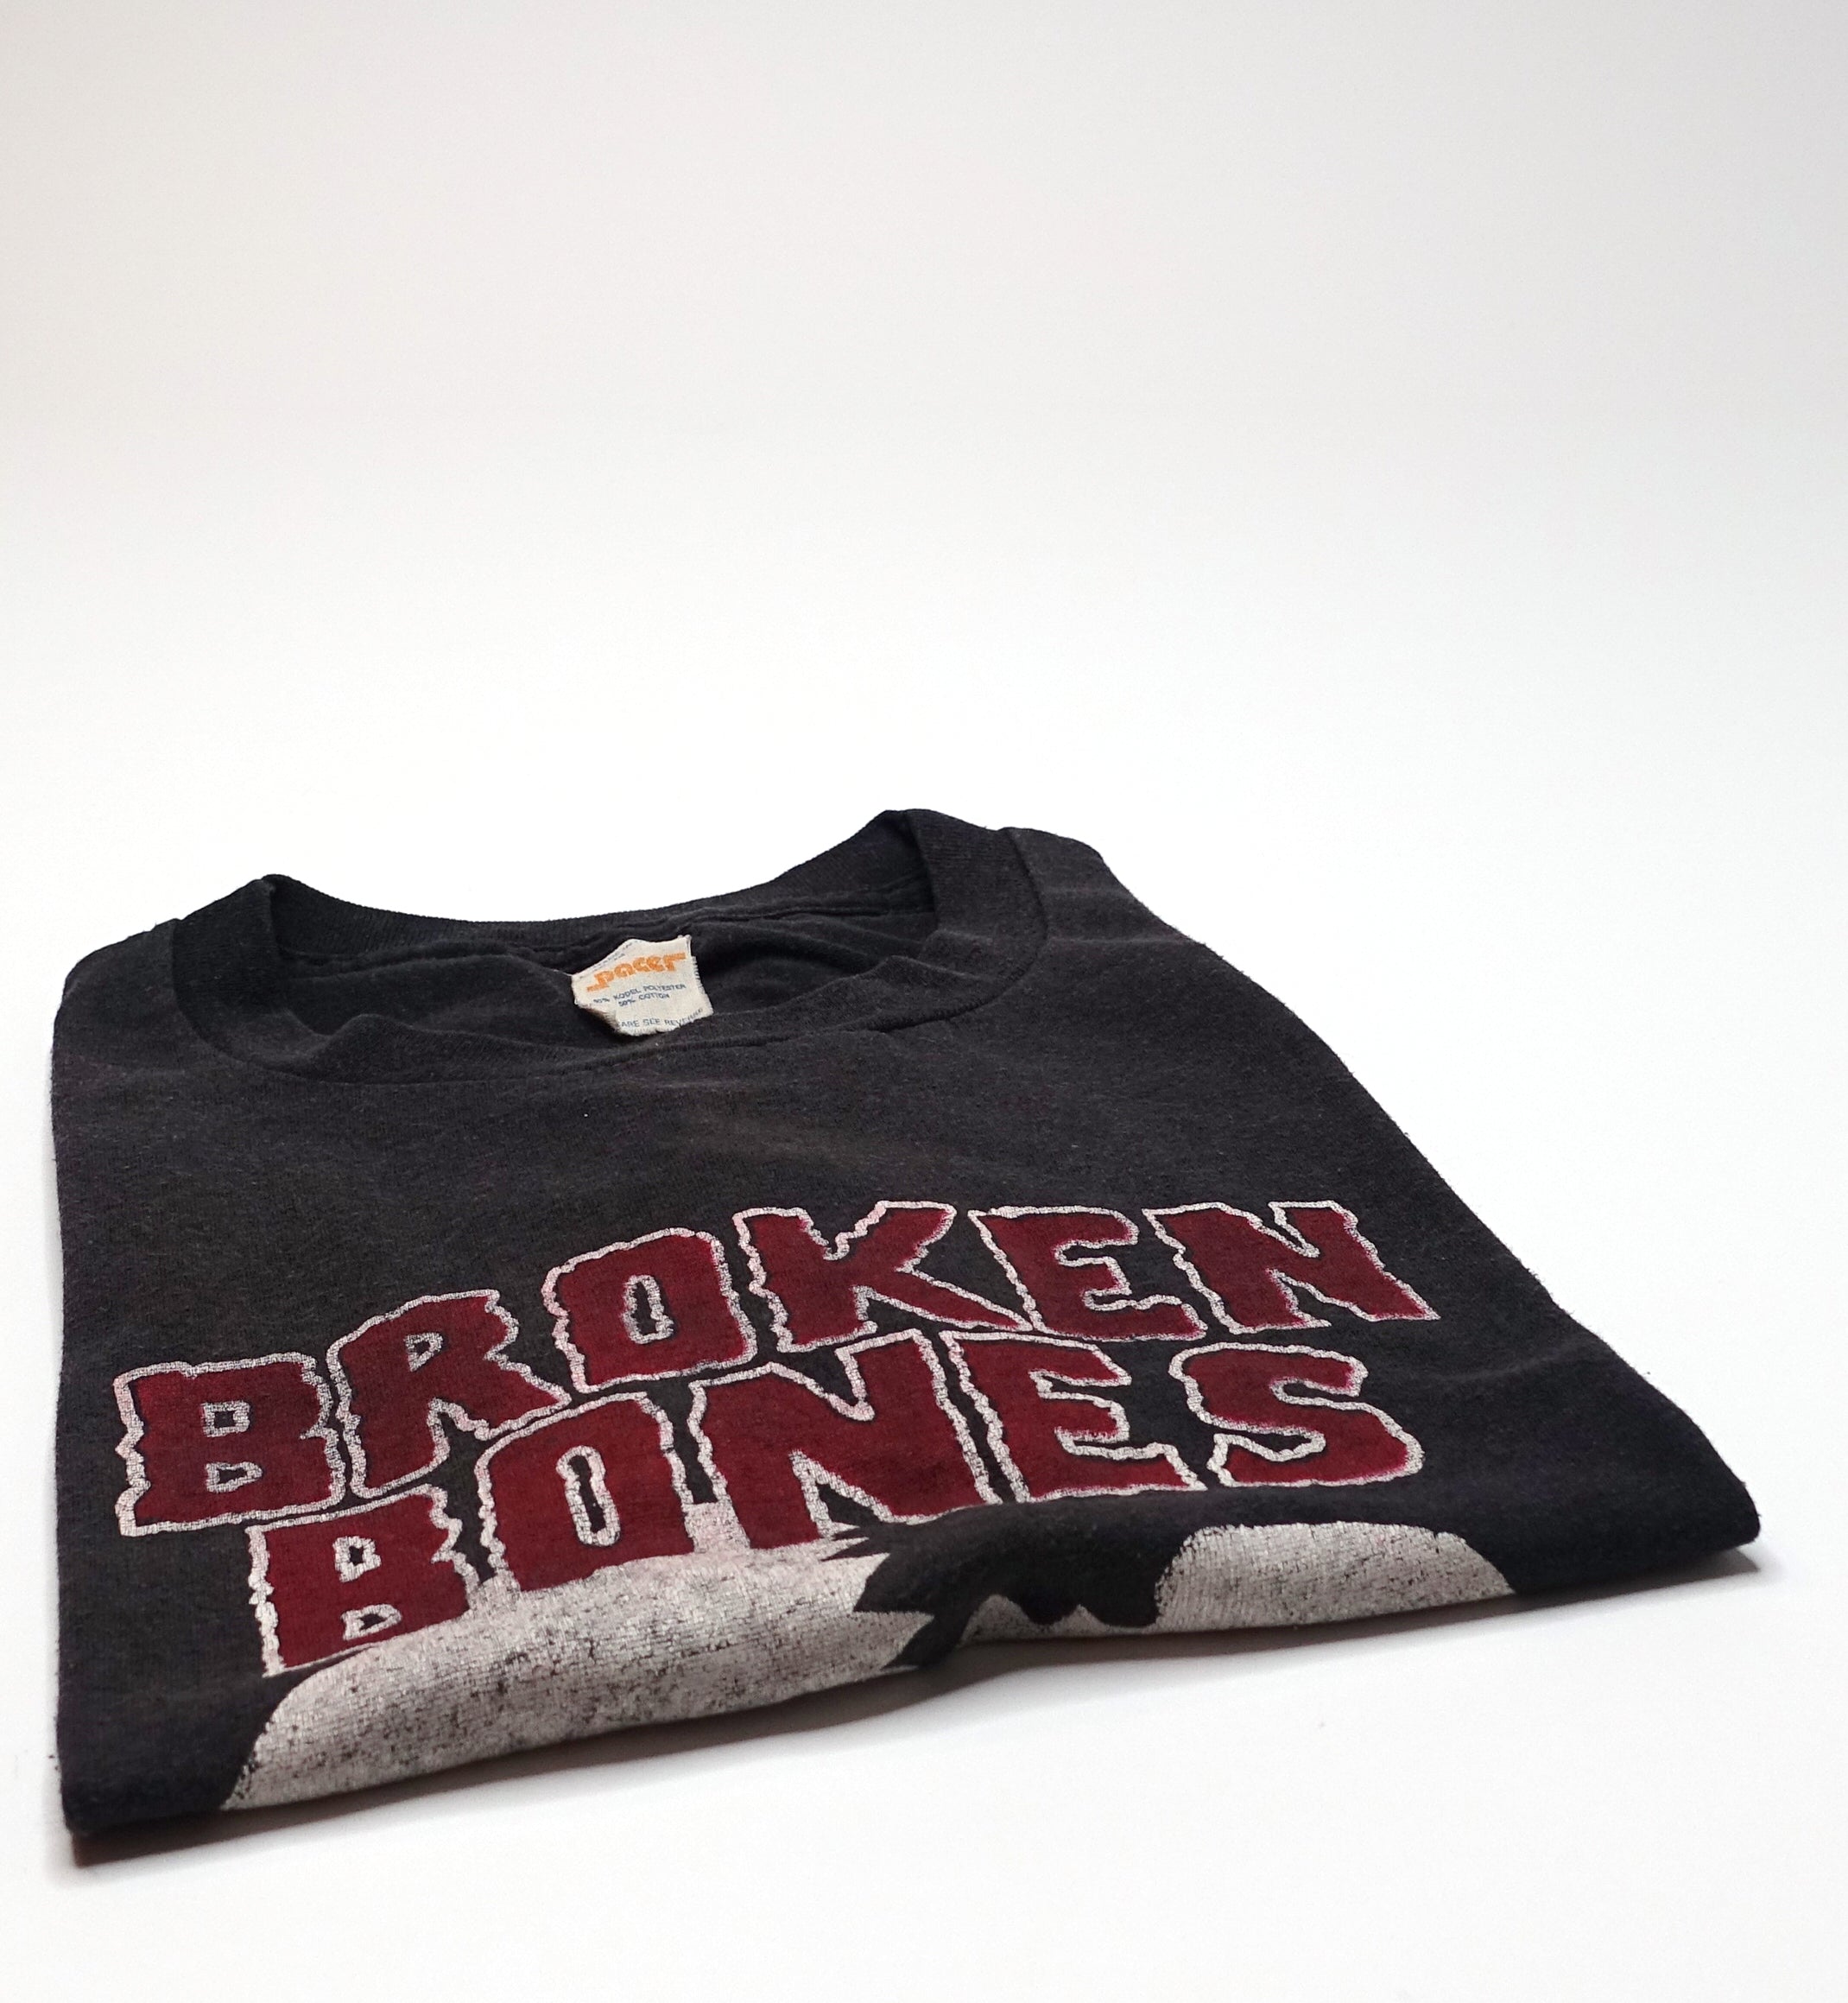 Broken Bones ‎– Never Say Die 1985 Tour (Cropped/Sleevess) Shirt Size Large